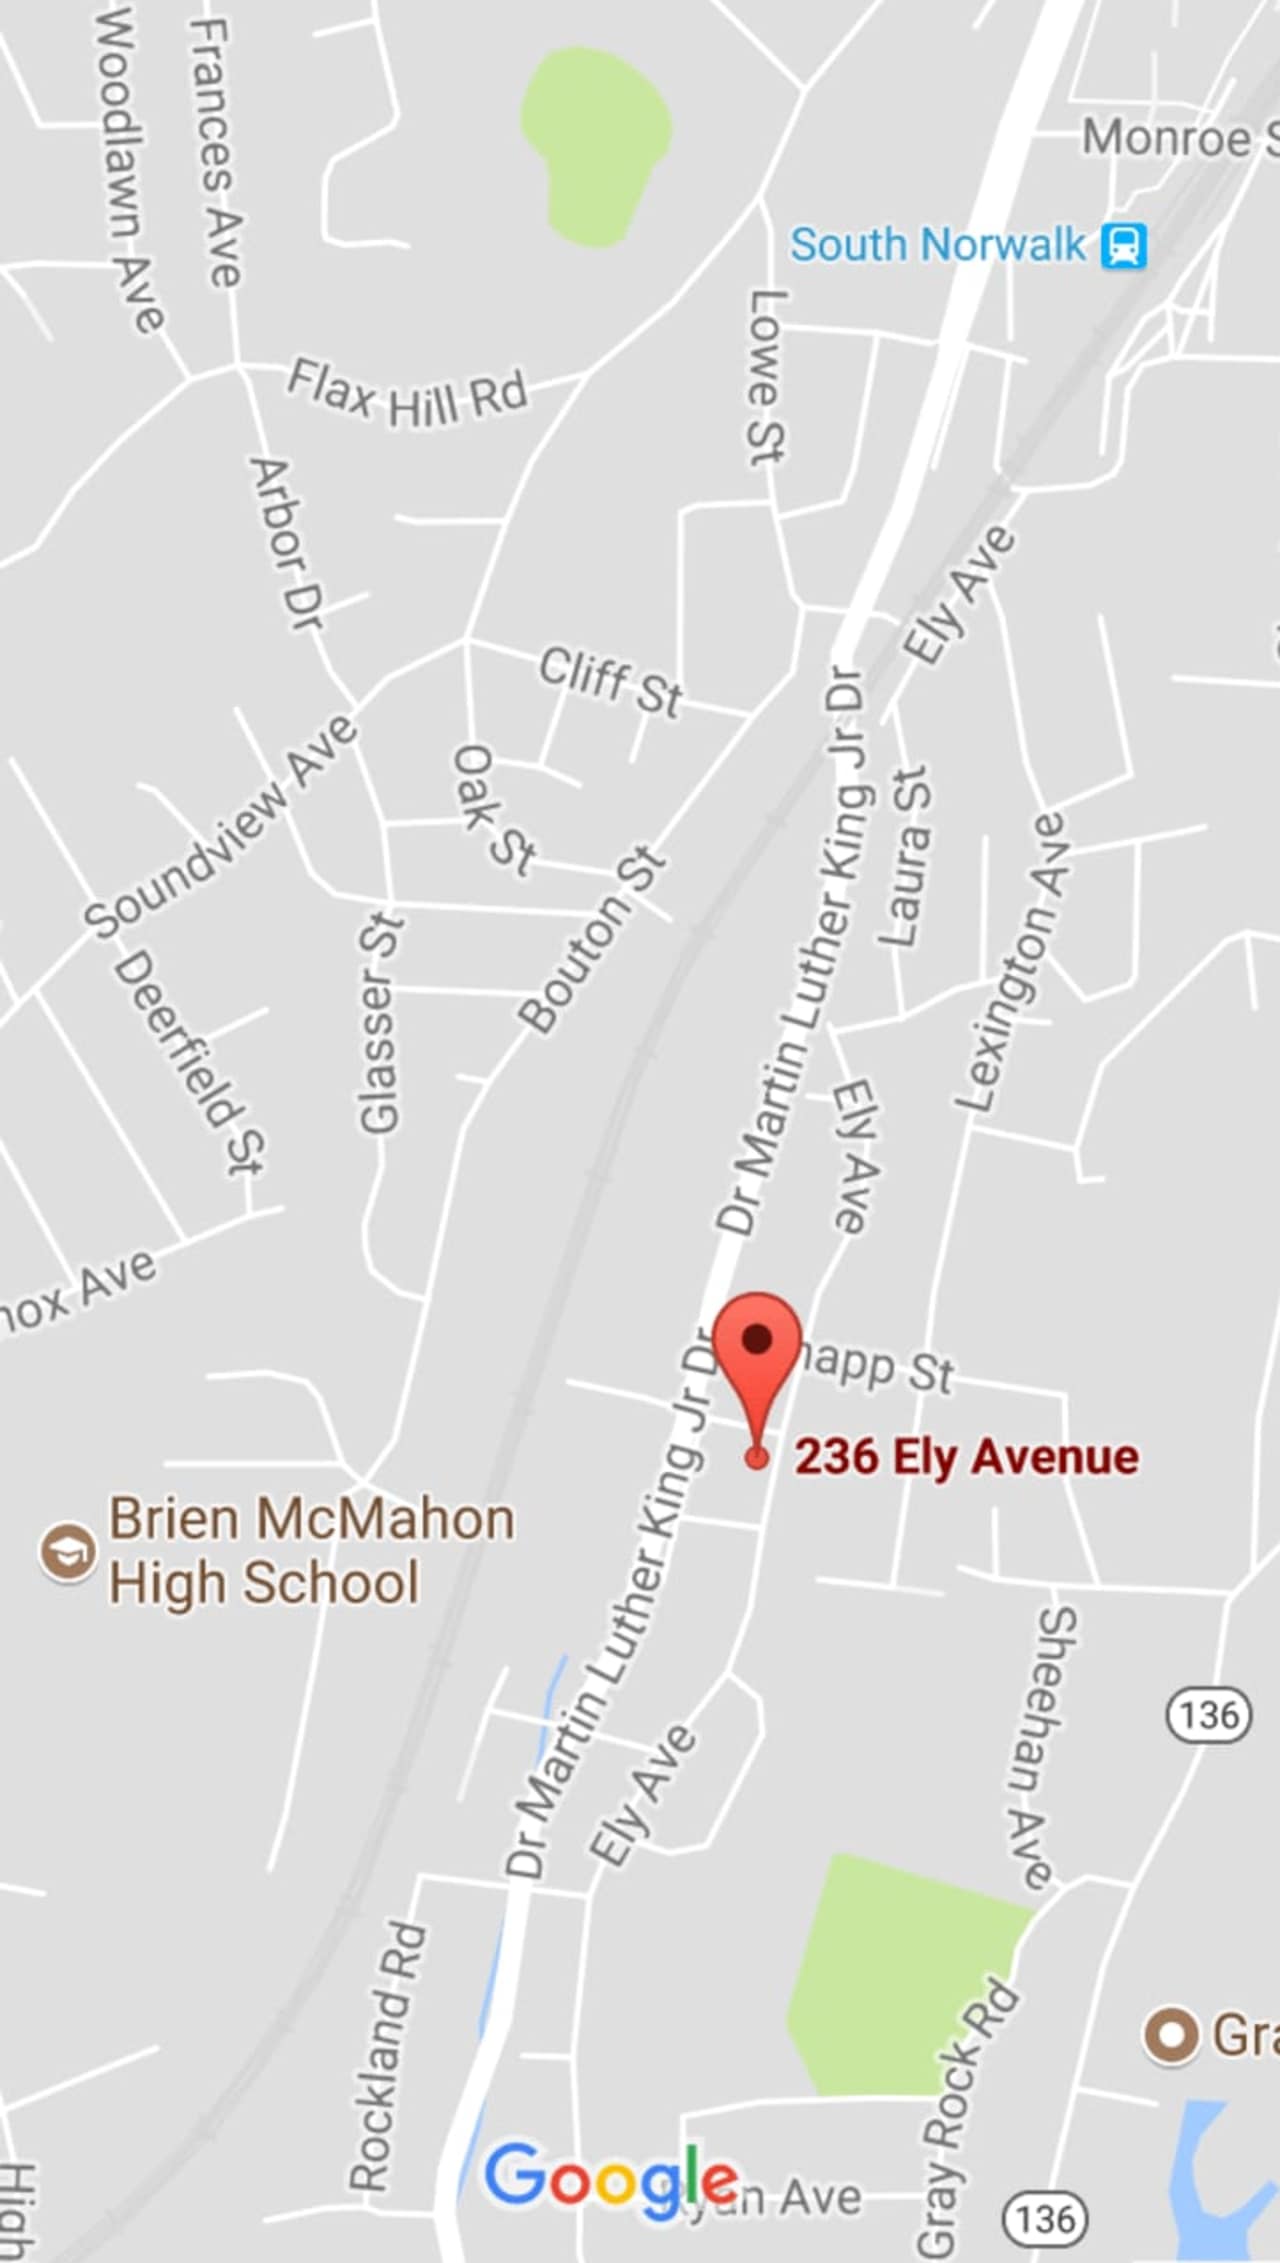 The fatal shooting occurred Thursday evening on Ely Avenue in Norwalk, police said.